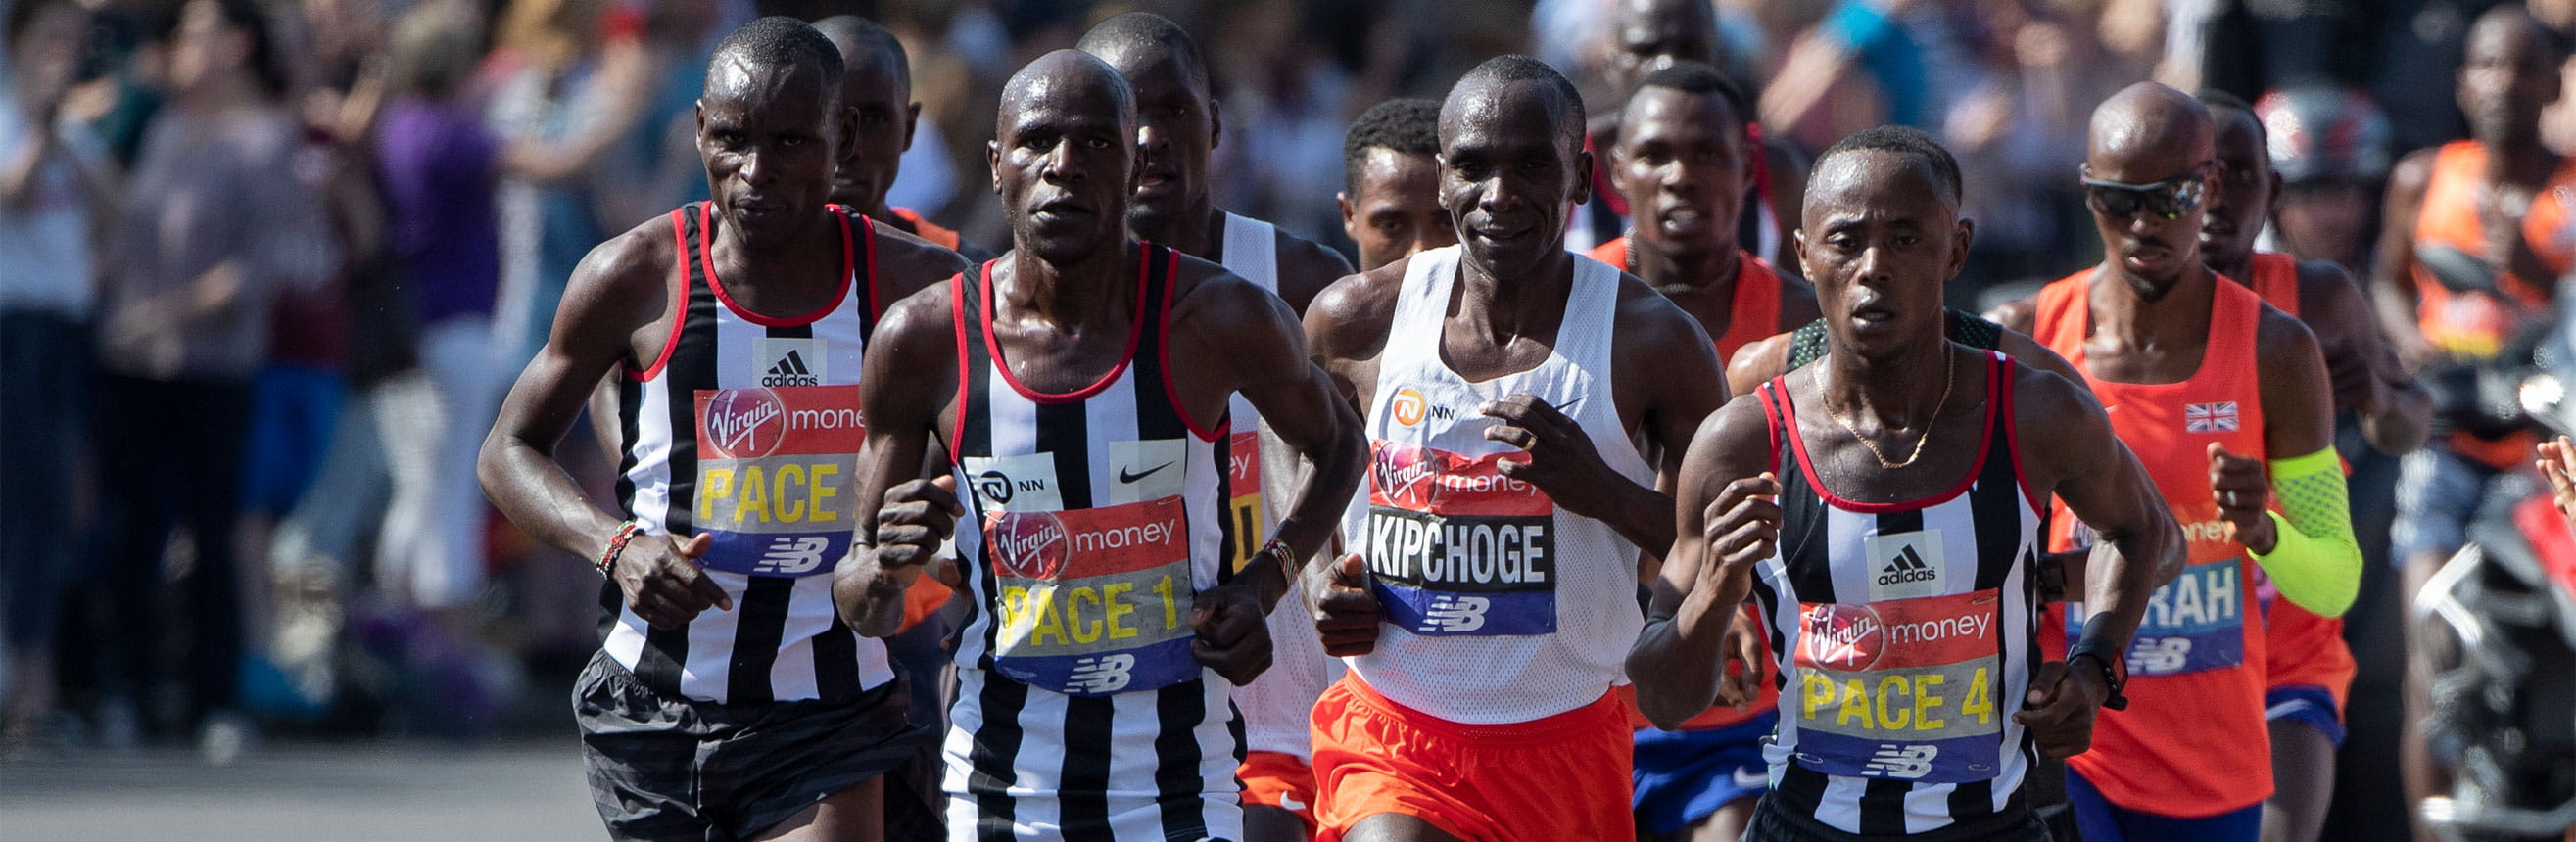 Eliud Kipchoge runs with pacemakers at the London Marathon